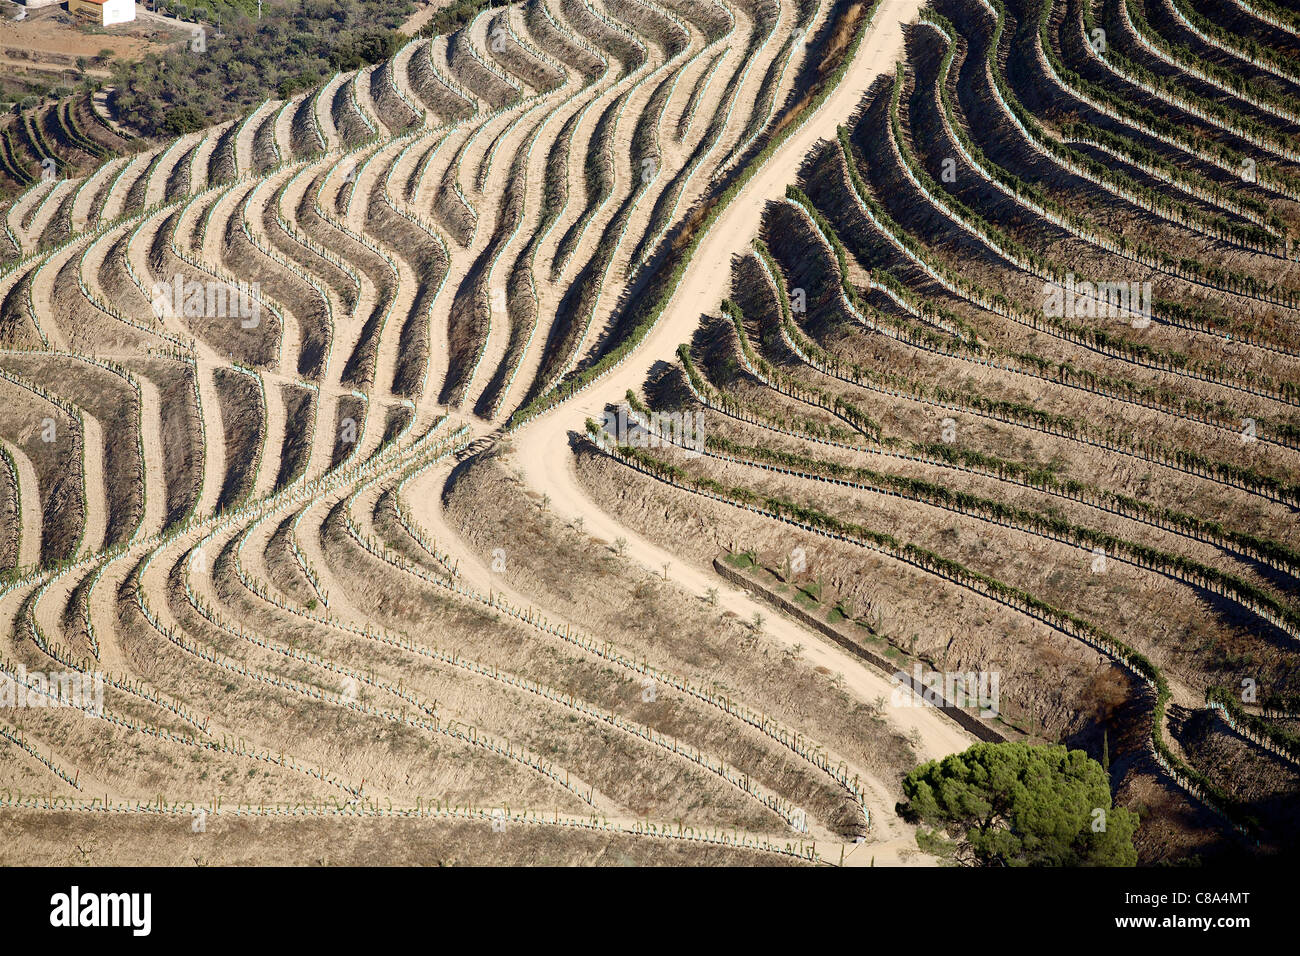 Vines in the  Douro valley in Portugal Stock Photo